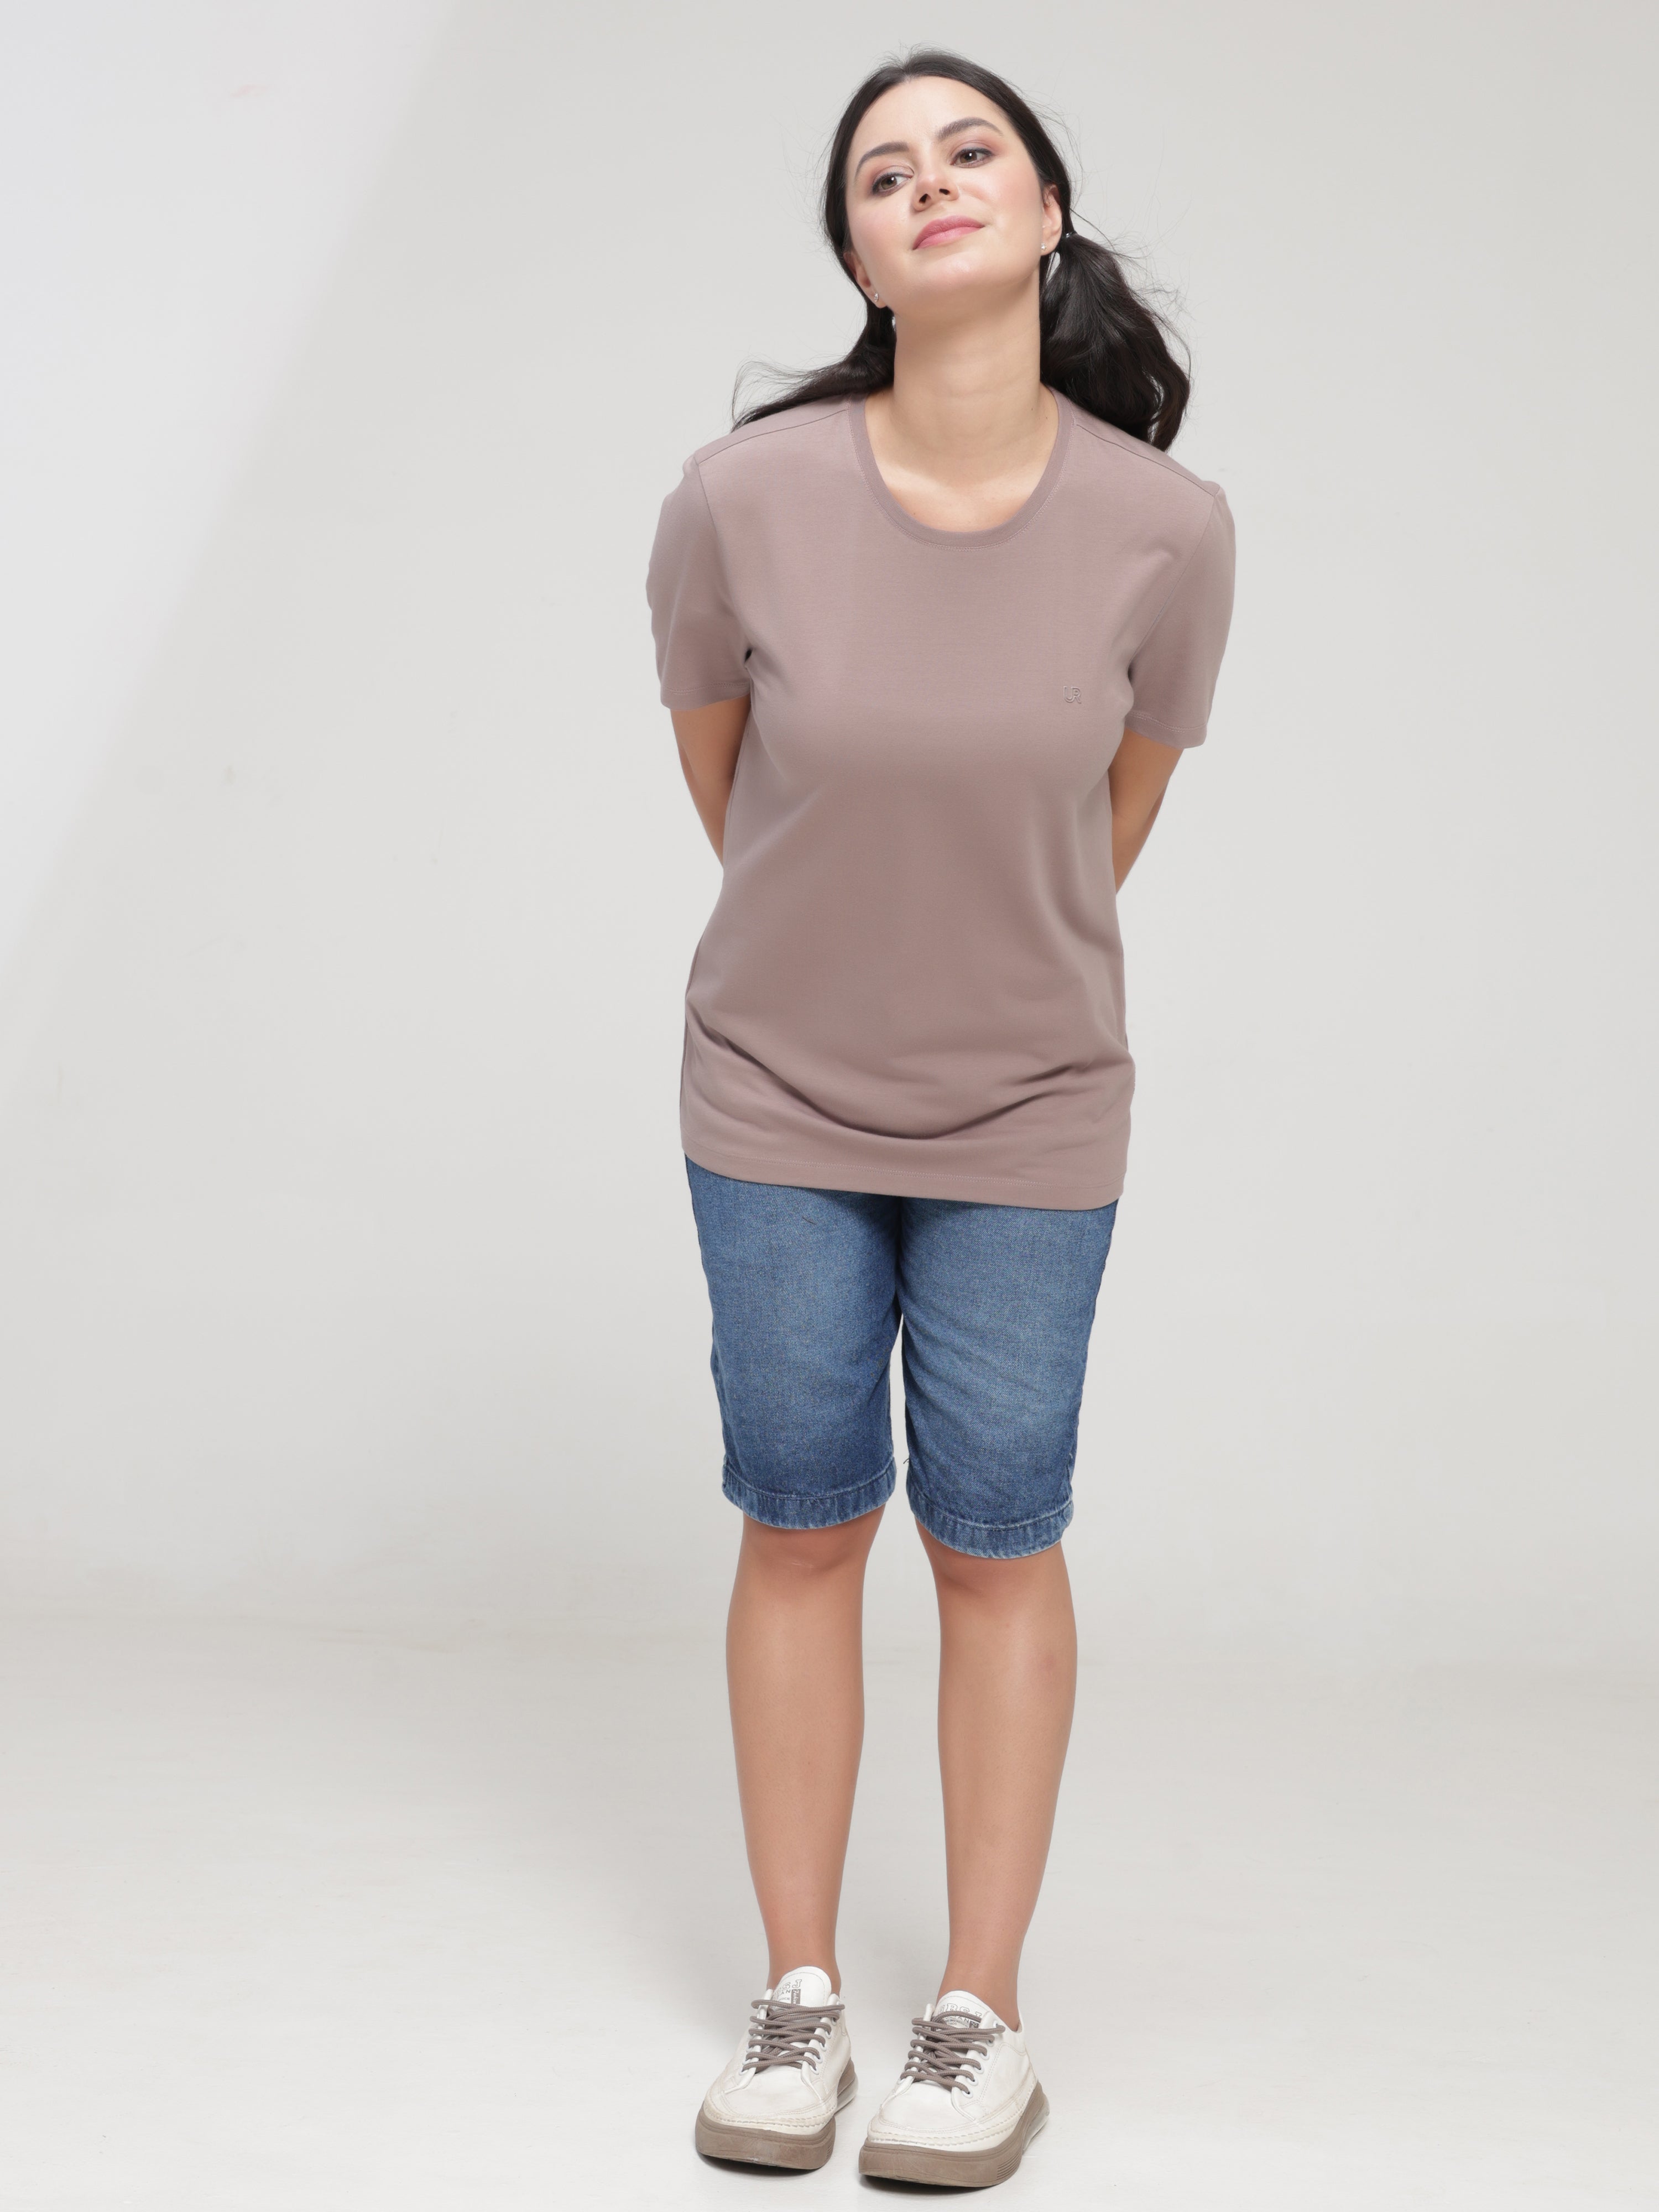 Woman wearing a Dusky Maroon Turms T-shirt, stain-proof, anti-odor, and stretchable, paired with denim shorts.